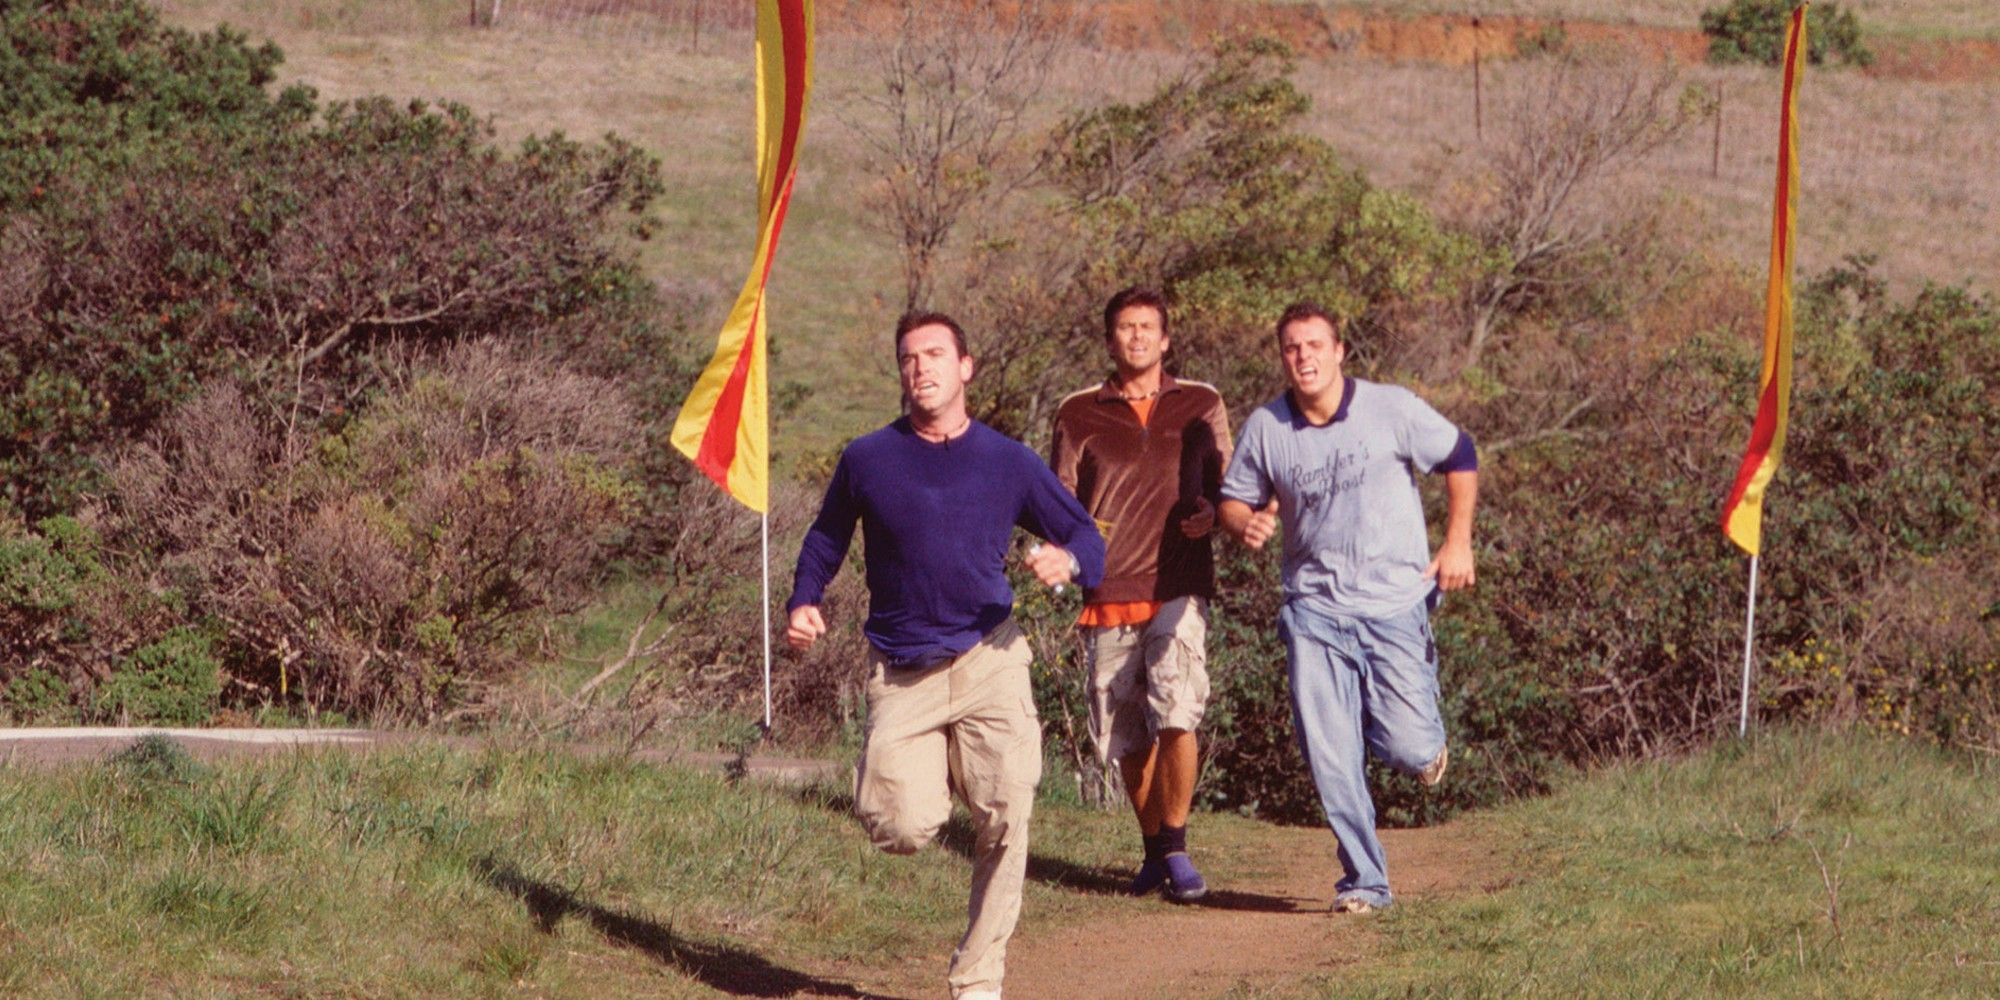 The dash to the finish moment on The Amazing Race season 2